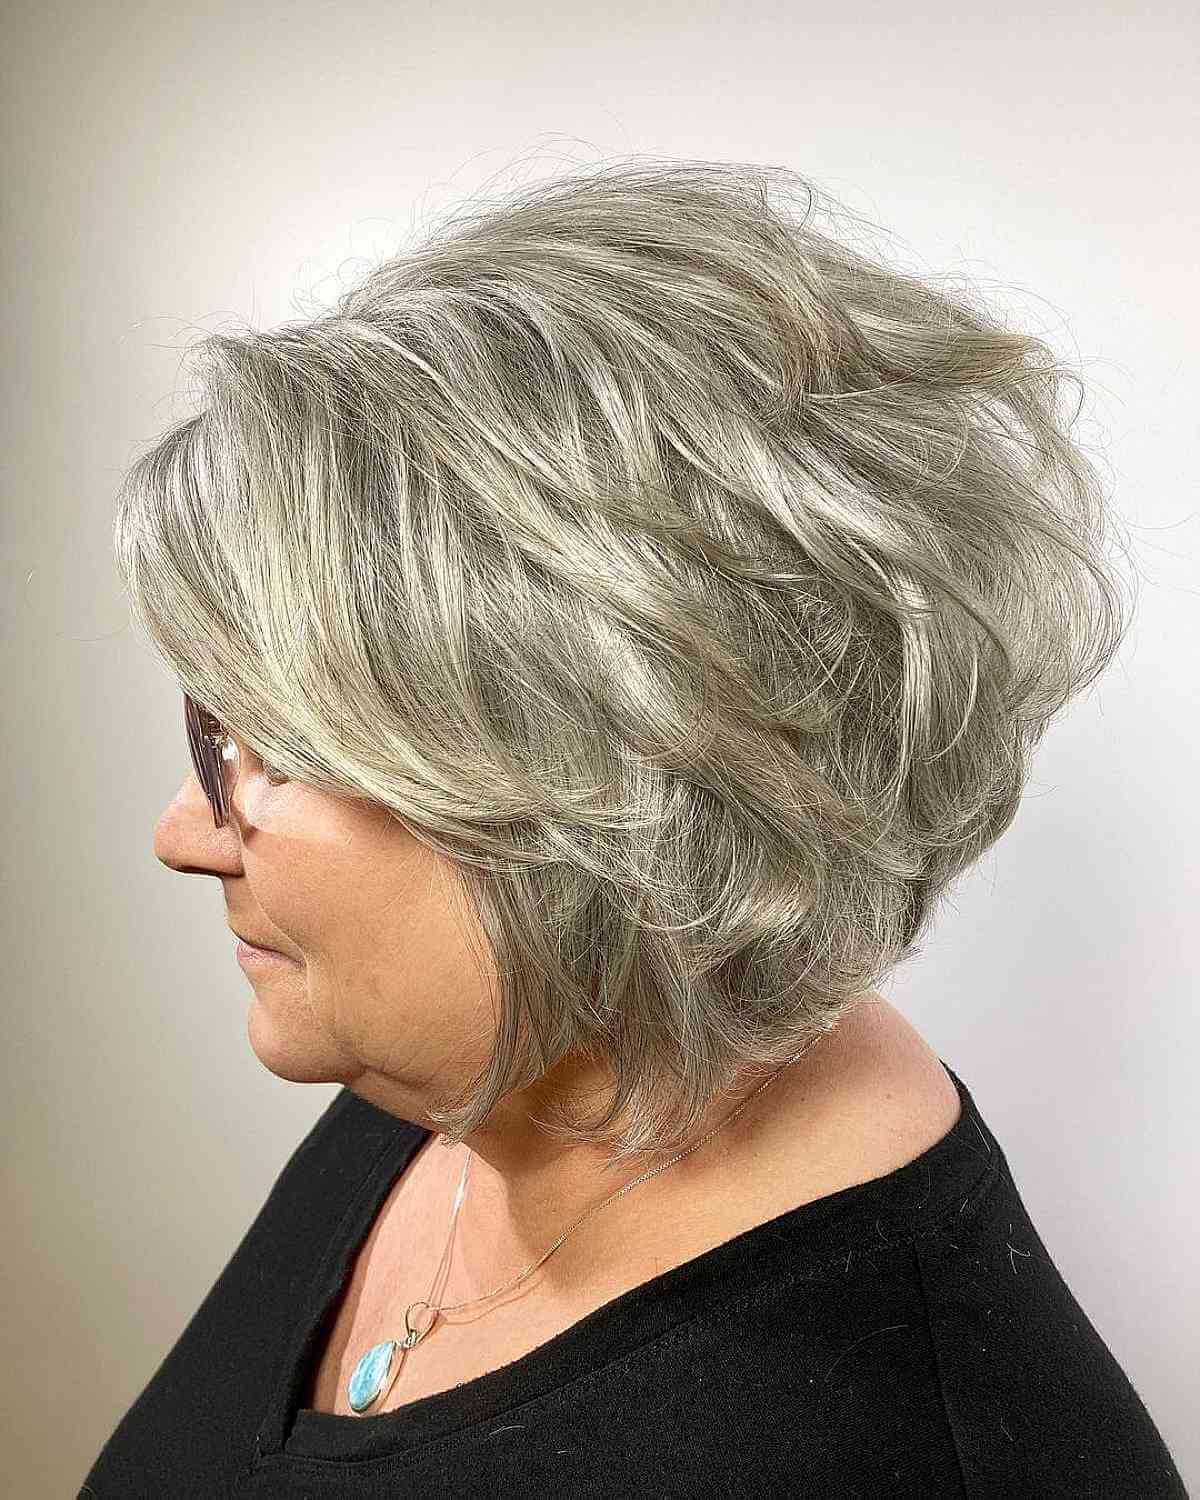 Voluminous Salt-and-Pepper Short Bob for Ladies Over Sixty with Round Faces